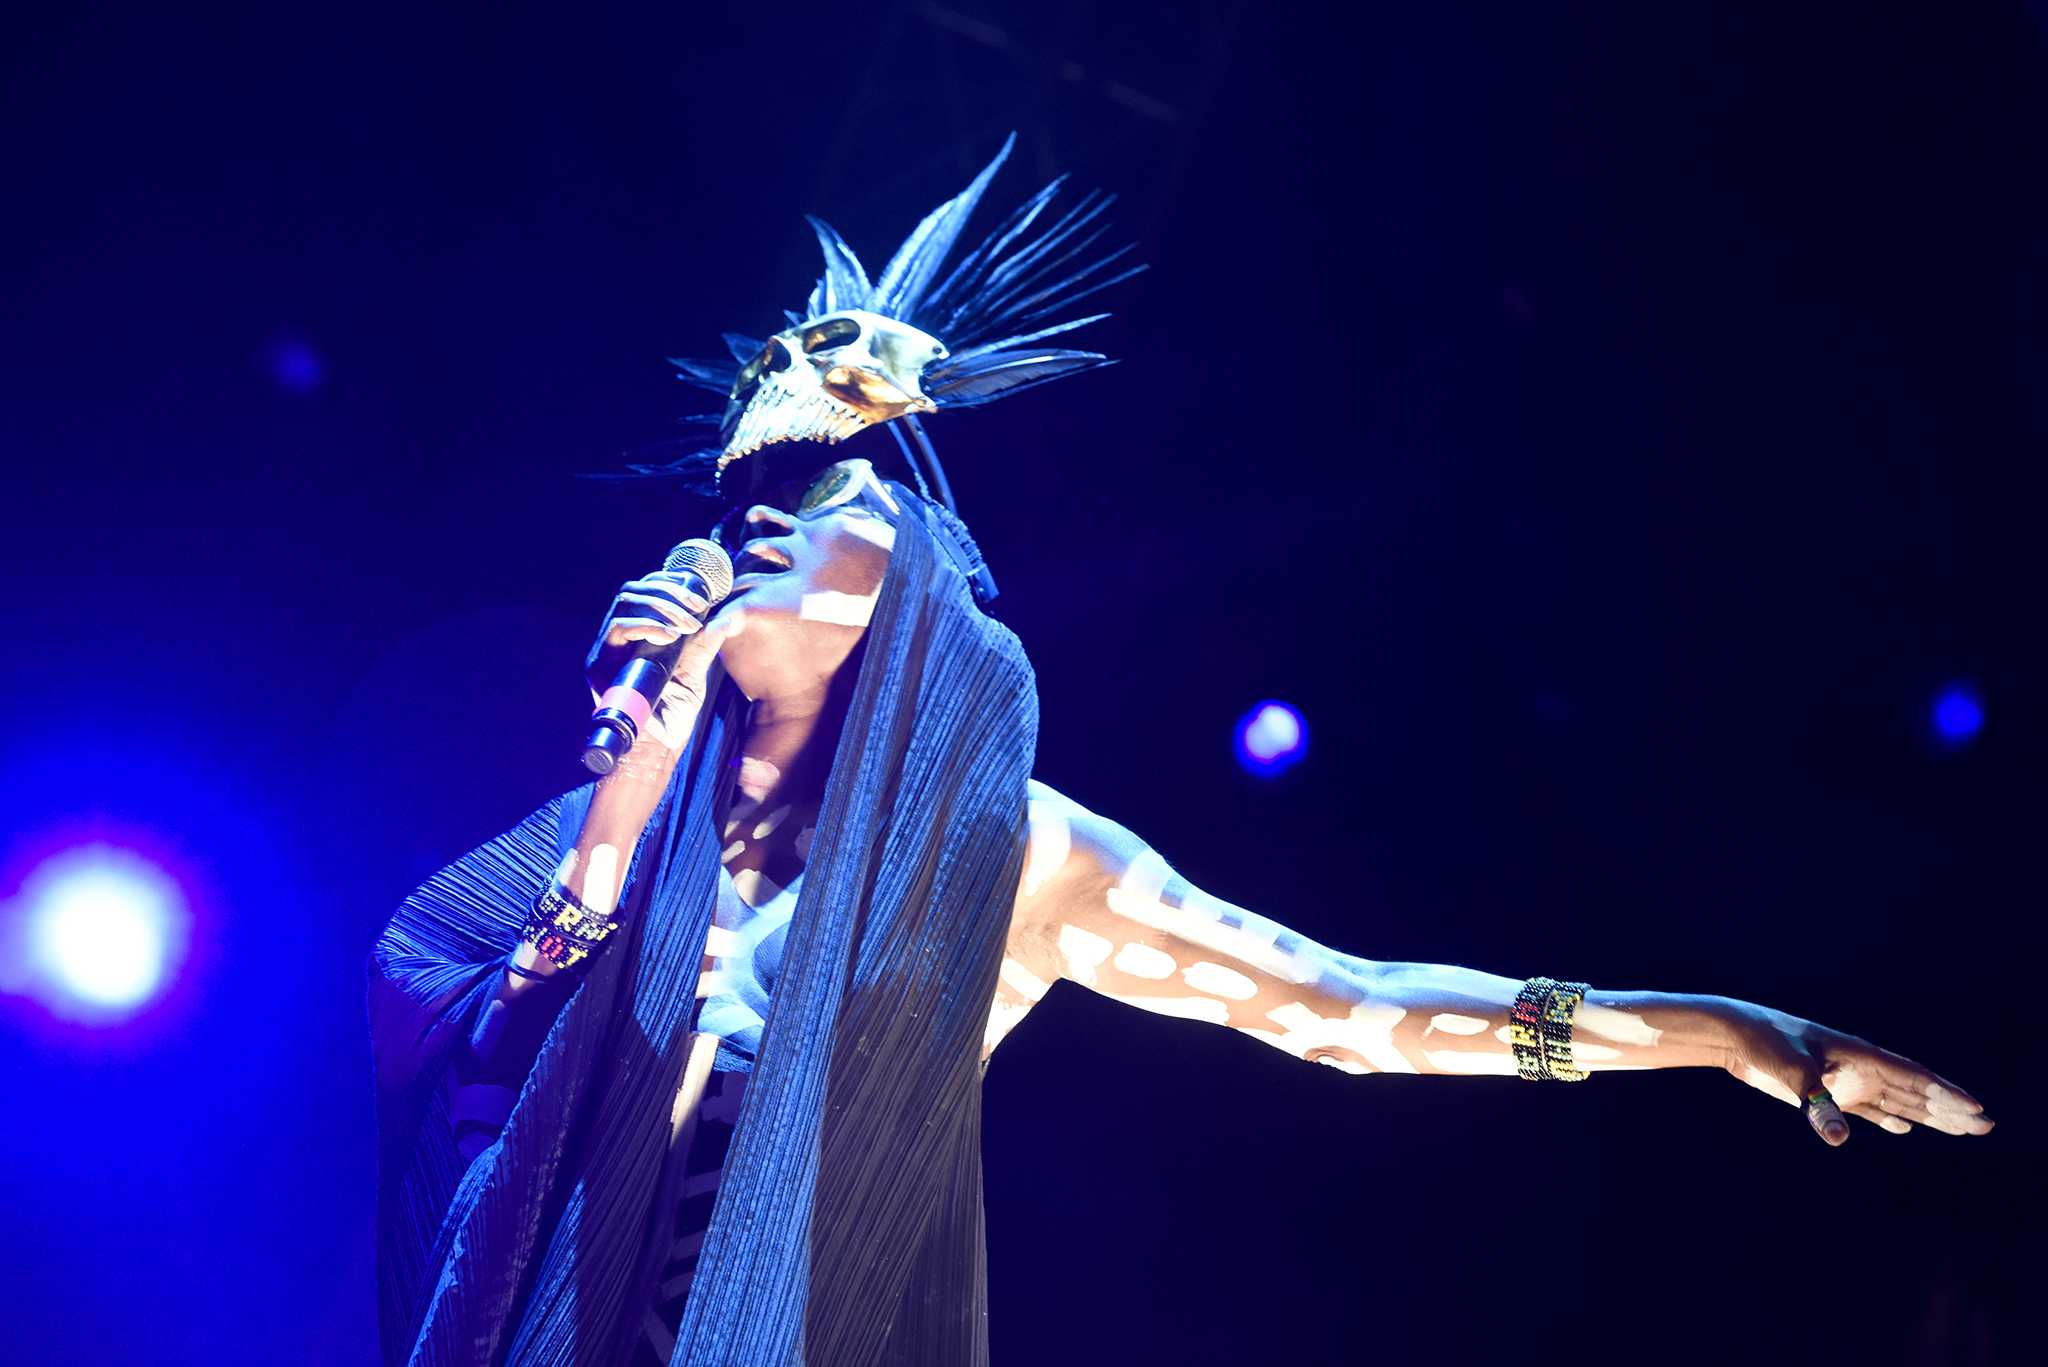 Grace Jones at Main Stage by Everett Fitzpatrick for FYF Fest